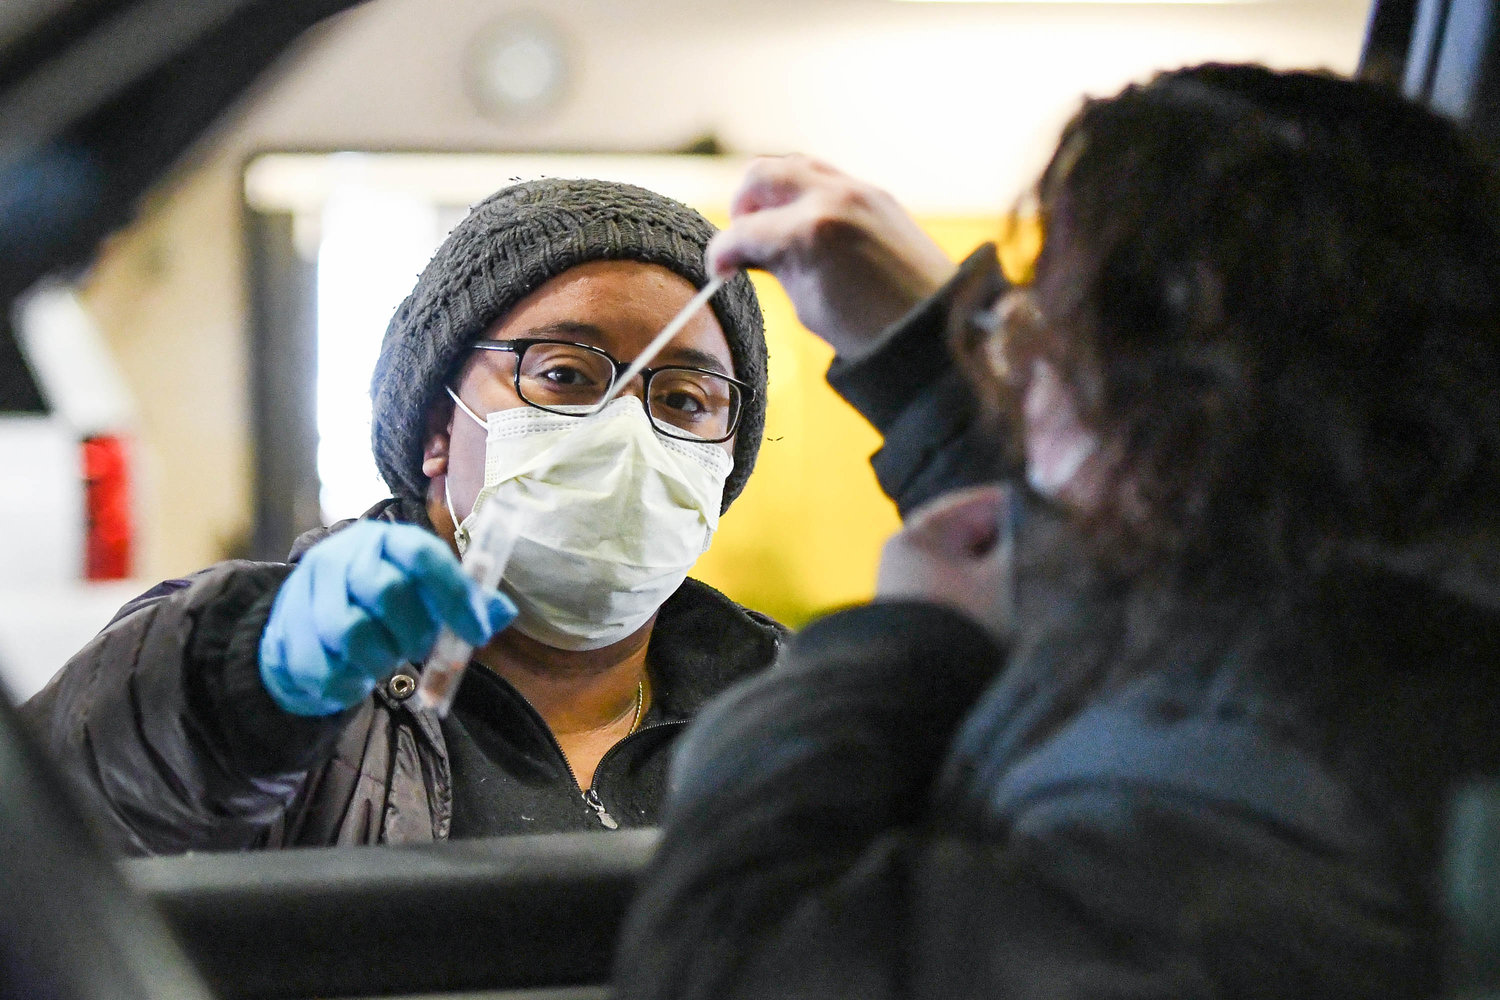 Noelle Feliz, left, holds out a test tube as a woman puts a nasal swab into it on Monday at Griffiss International  Airport. Precision Clinical Laboratories is offering drive-thru COVID-19 testing at Griffiss International Airport from 8:30 a.m. to 4:30 p.m. Monday through Friday.